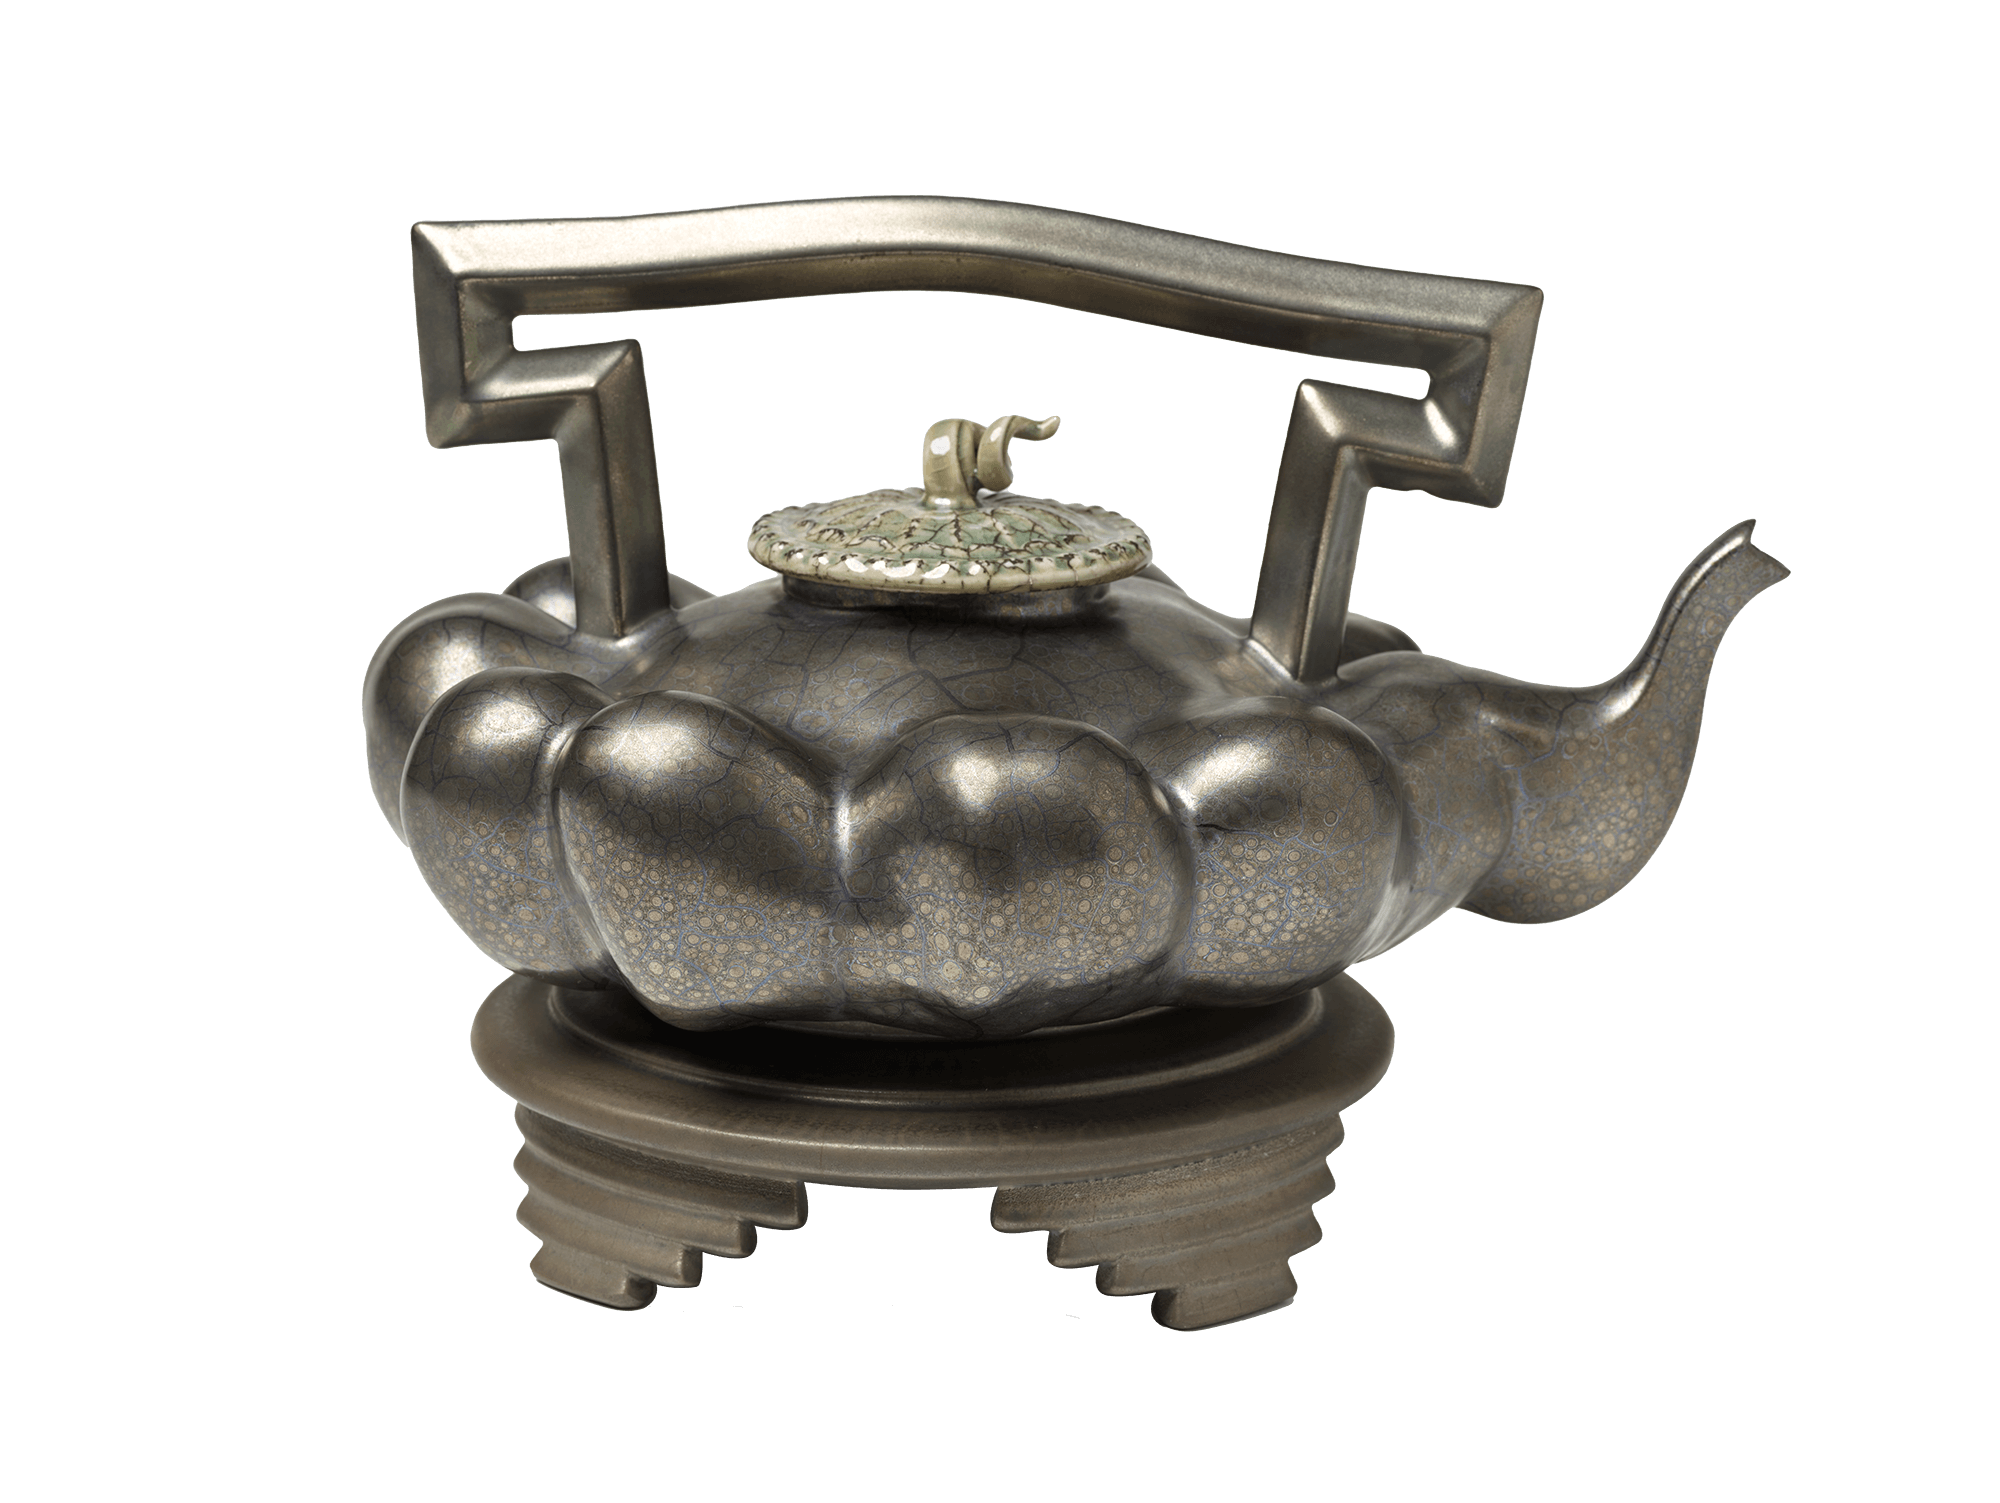 /Squash-shaped%20teapot%20in%20profile.%20Curling%20finial%2C%20rectangular%20handle%2C%20and%20stacked%20rectangular%20feet.%20Covered%20in%20a%20dark%20grey%20metallic%20glaze.